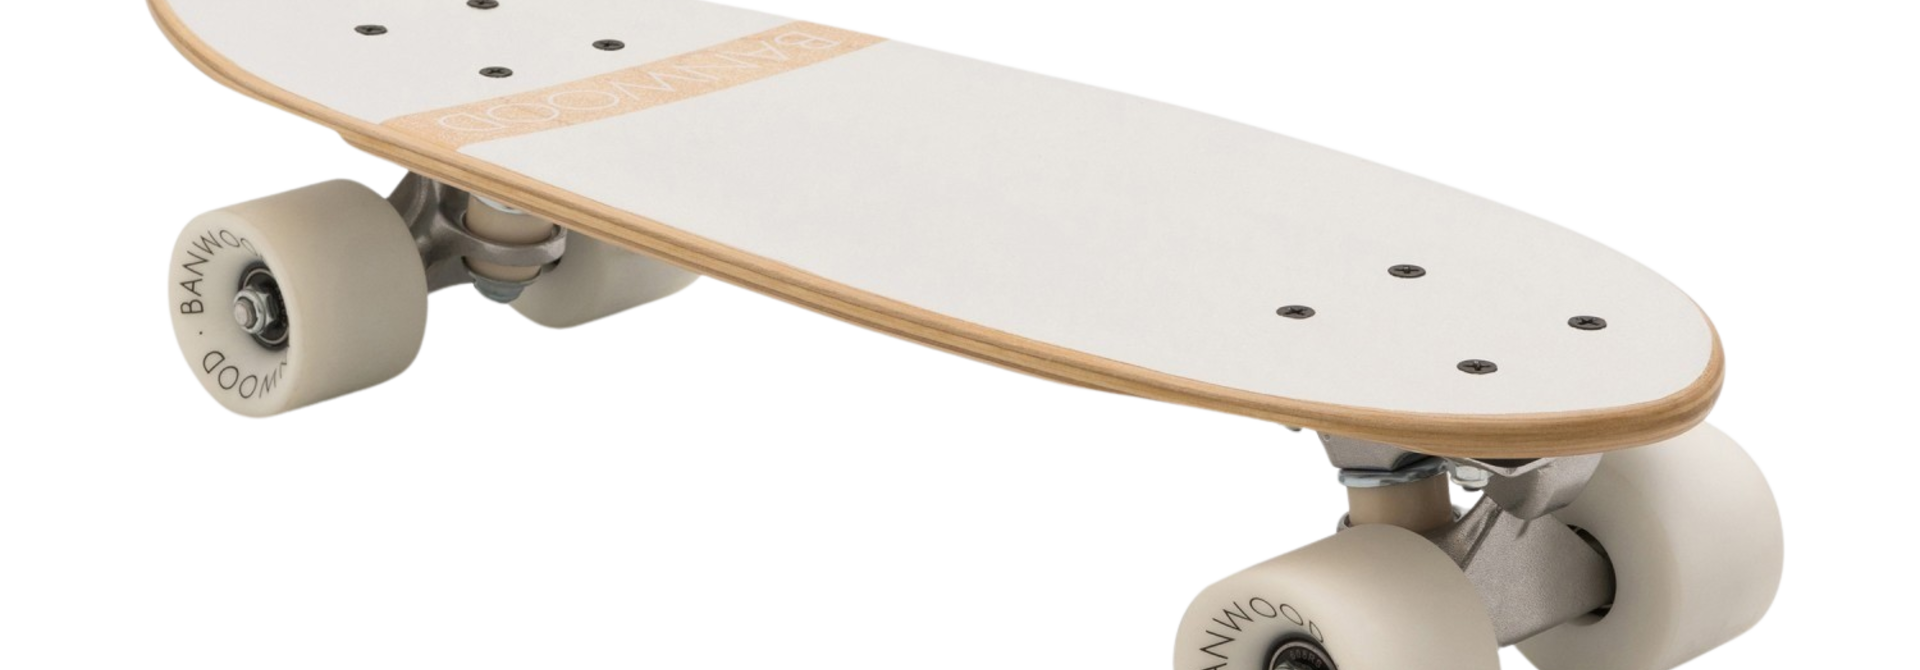 Skateboard | The Kids Collection, White - 21.3 Inch x 6.9 Inch x 4.5 Inch